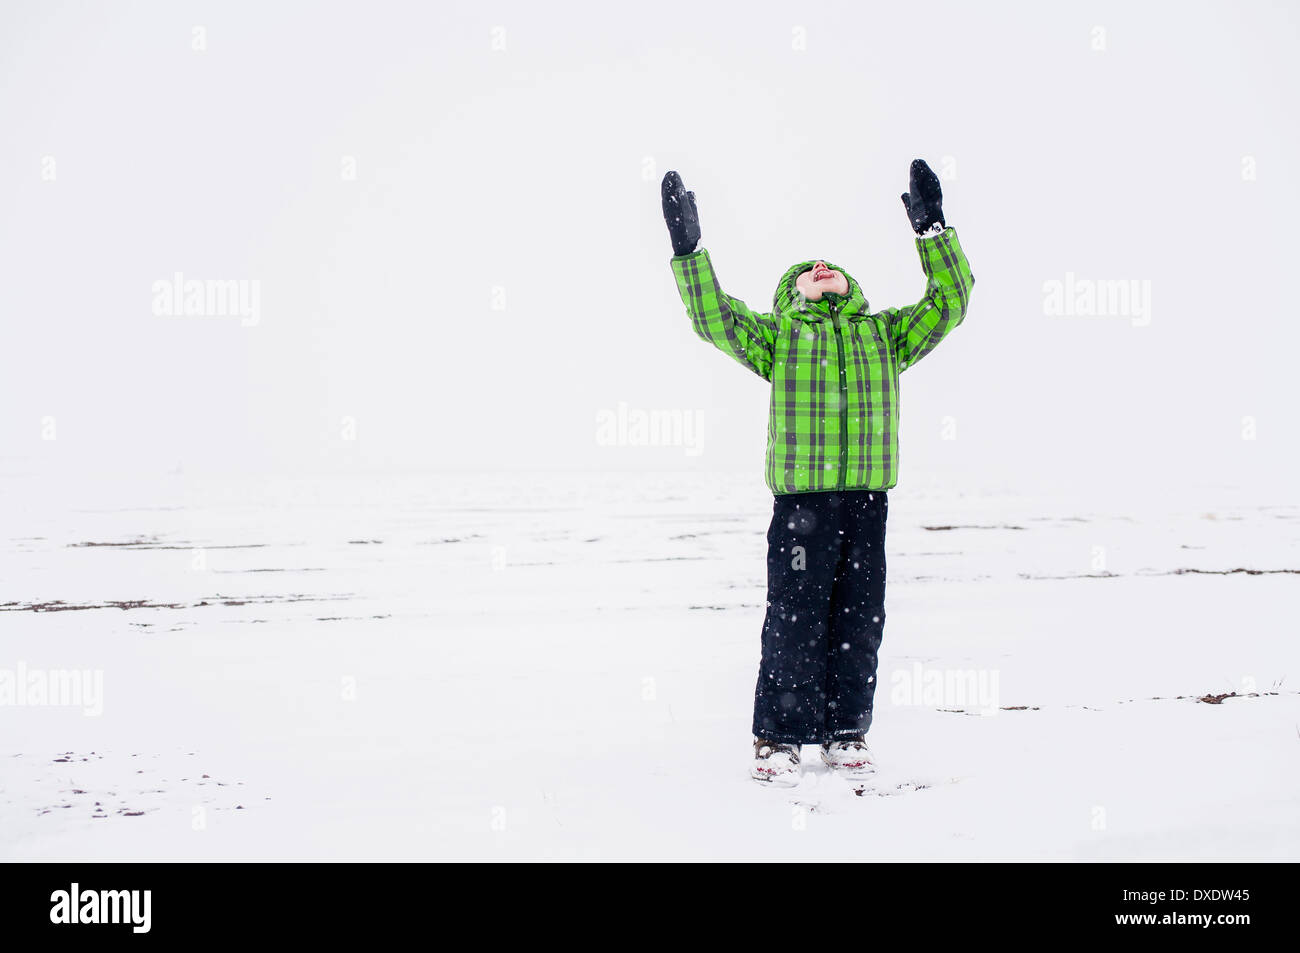 Boy (4-5) with raised arms in snowy landscape, Colorado, USA Stock Photo